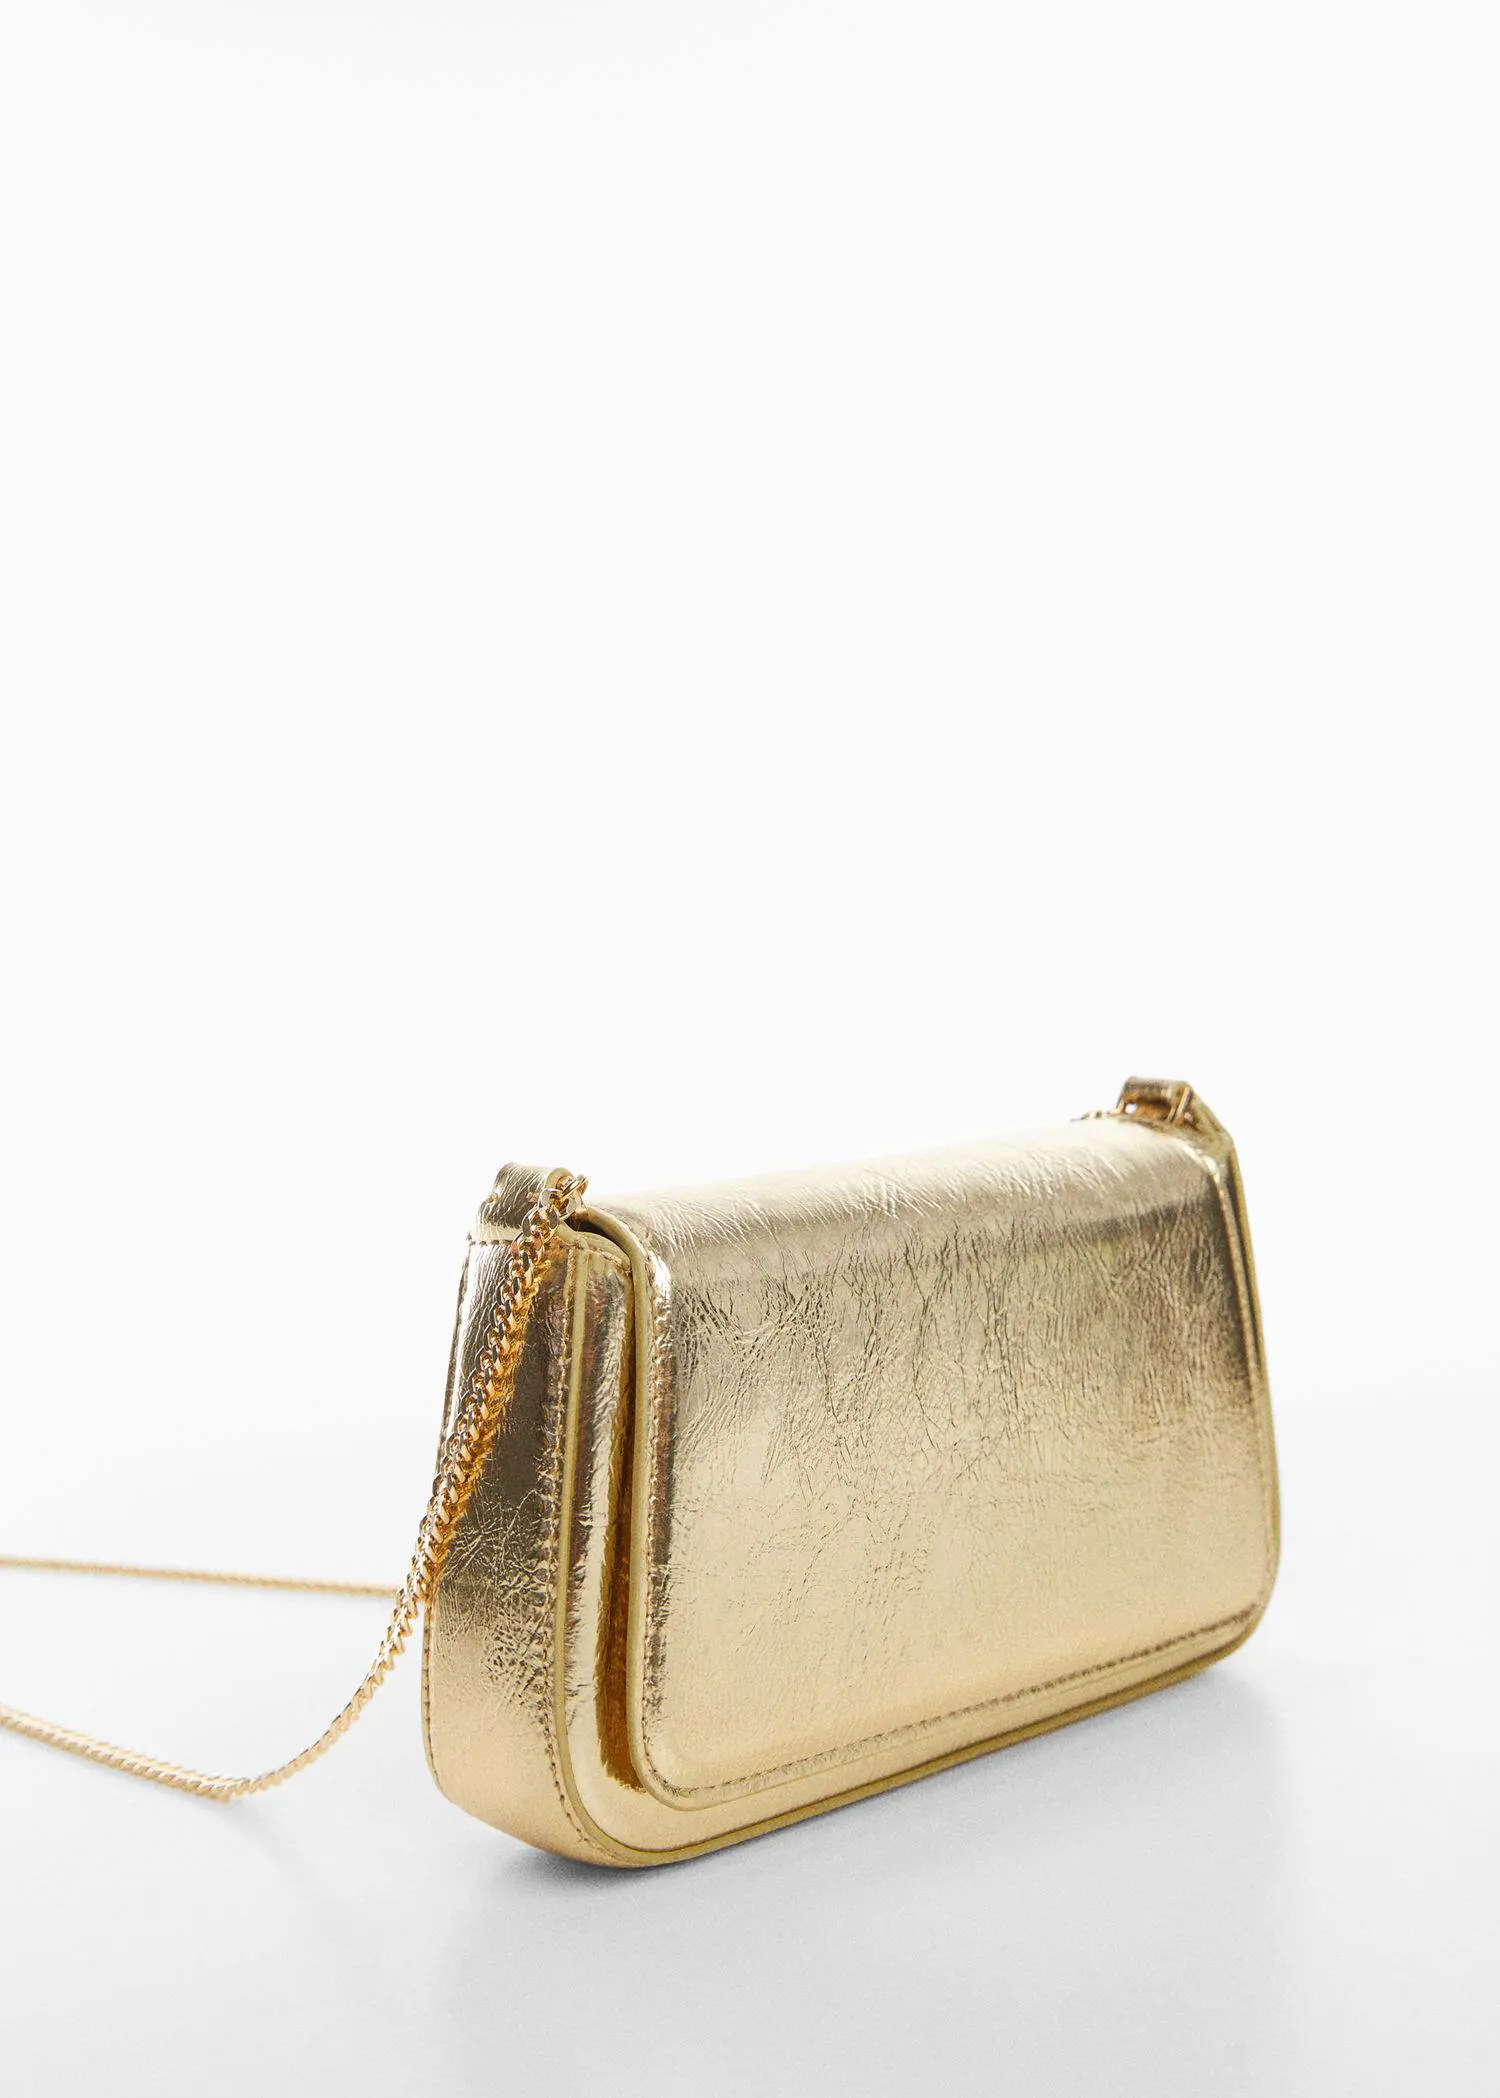 Mango Patent leather-effect chain bag. 3